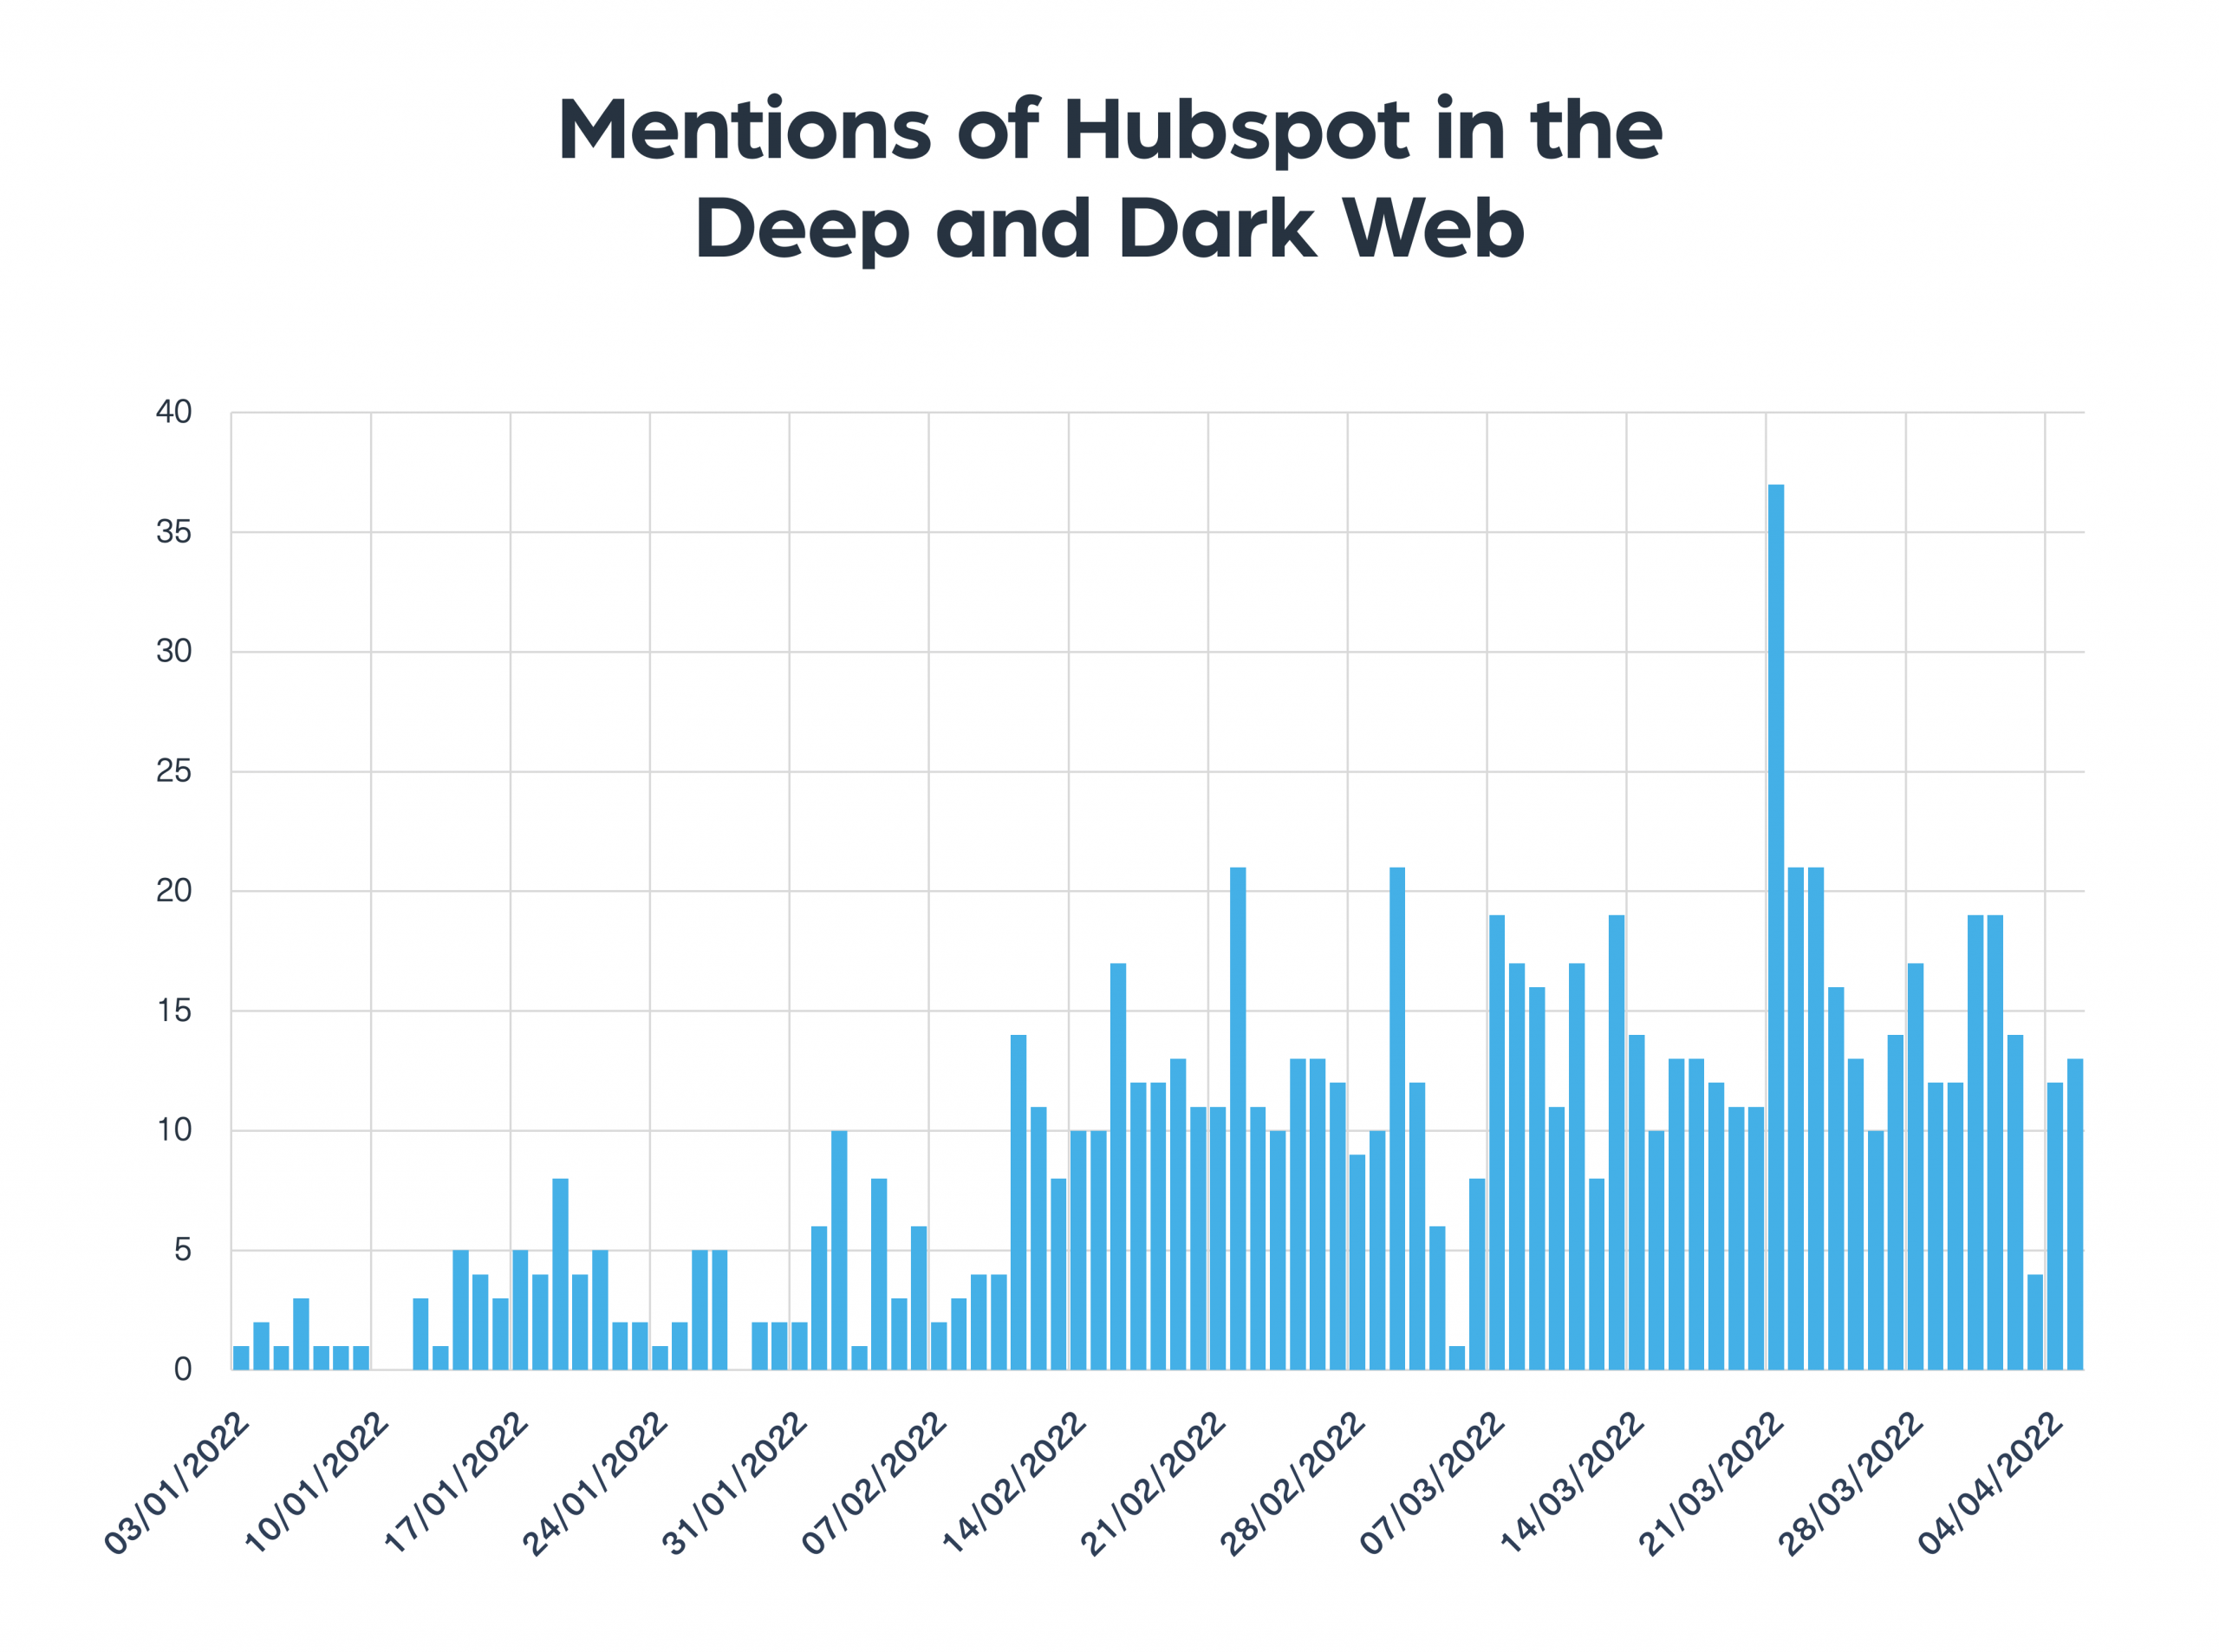 The mentions of Hubspot on the deep and dark web over the past months